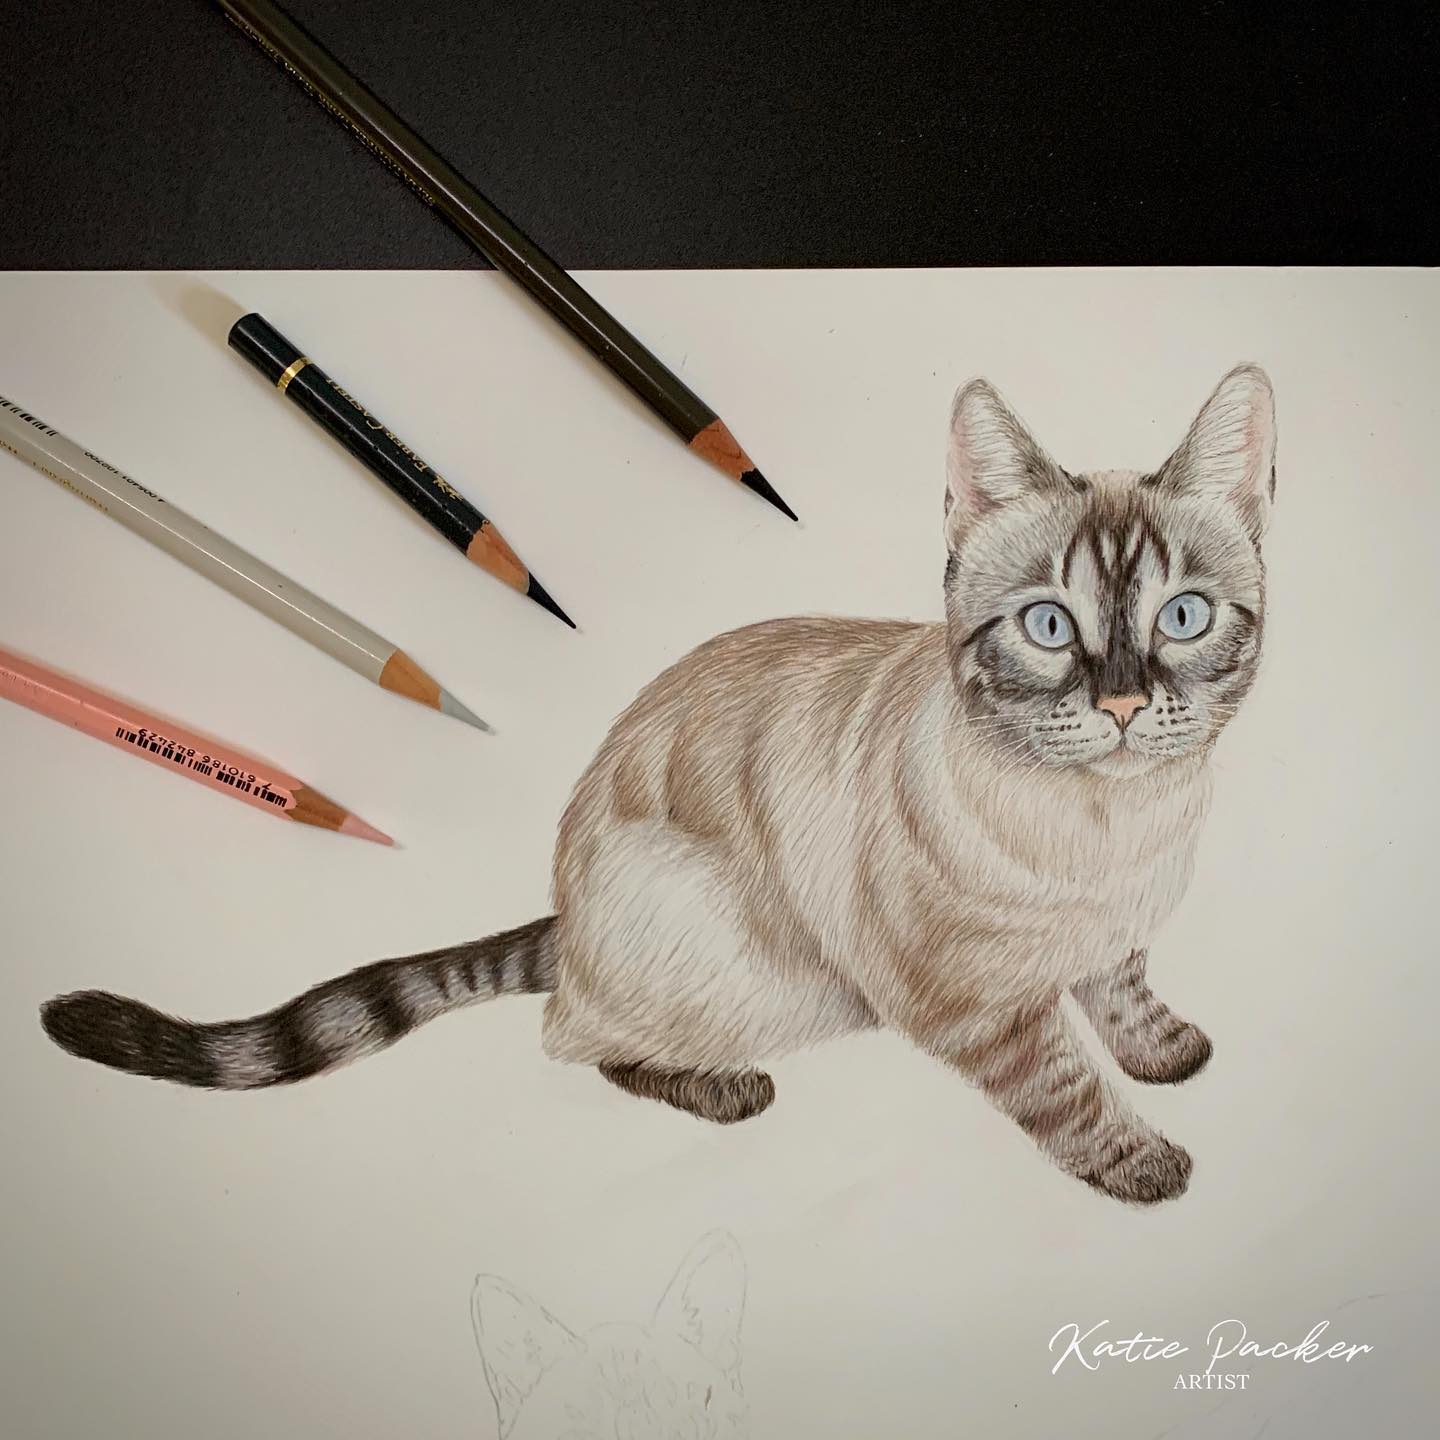 Hints & Tips on drawing with Katie Packer using Polychromos Artist Pencils